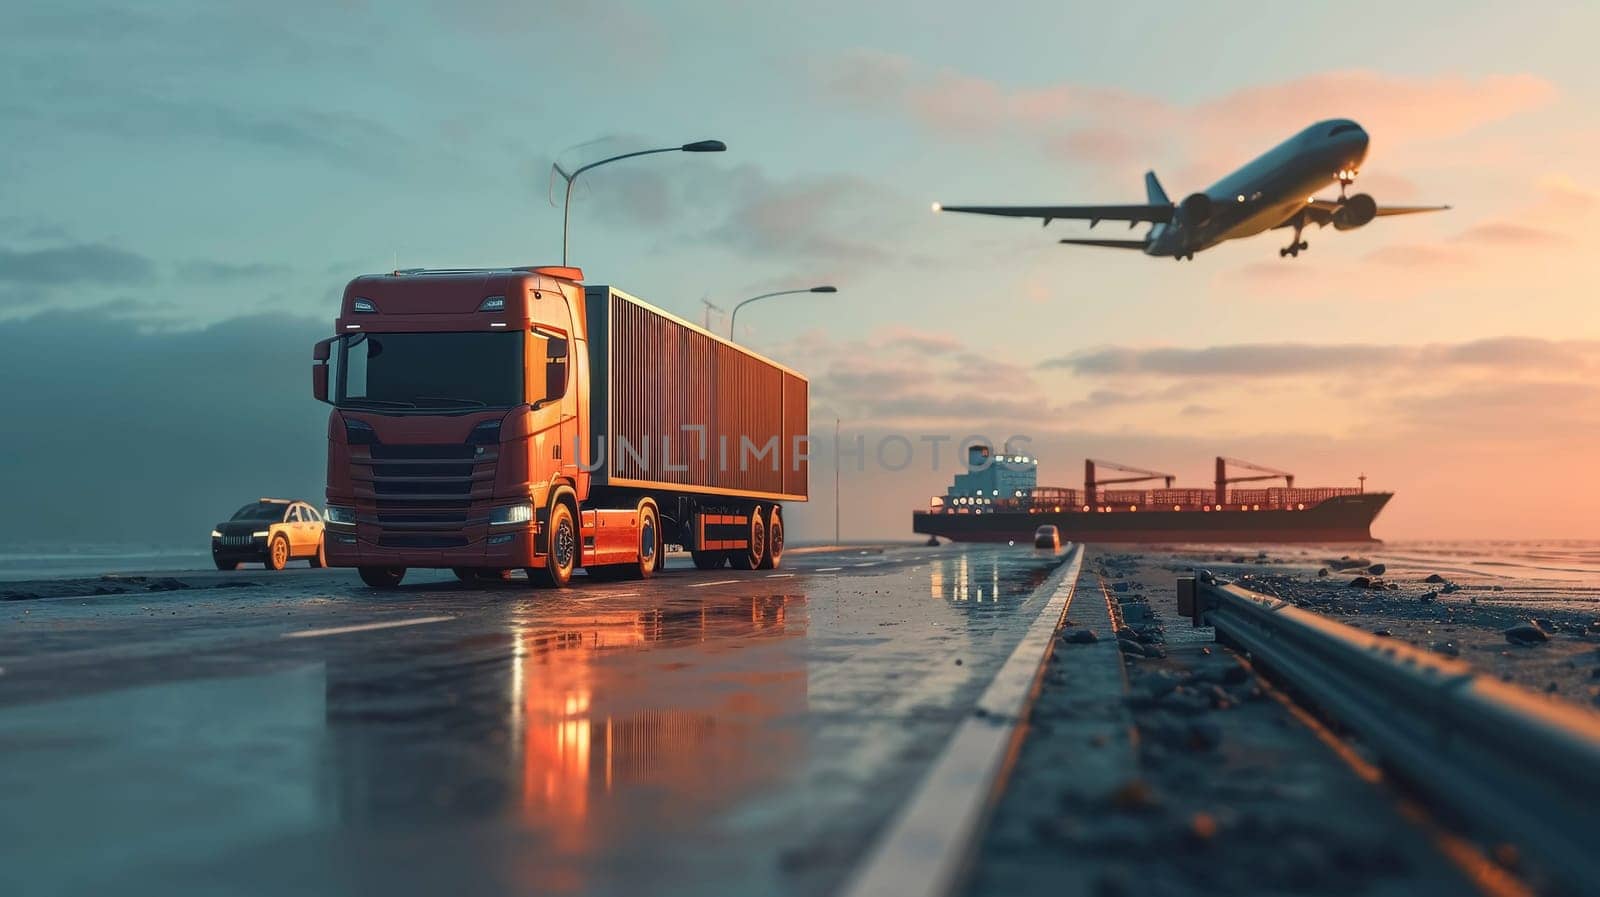 A vibrant sunset at a transportation hub with a cargo truck, airplane, and ship signaling busy commerce.